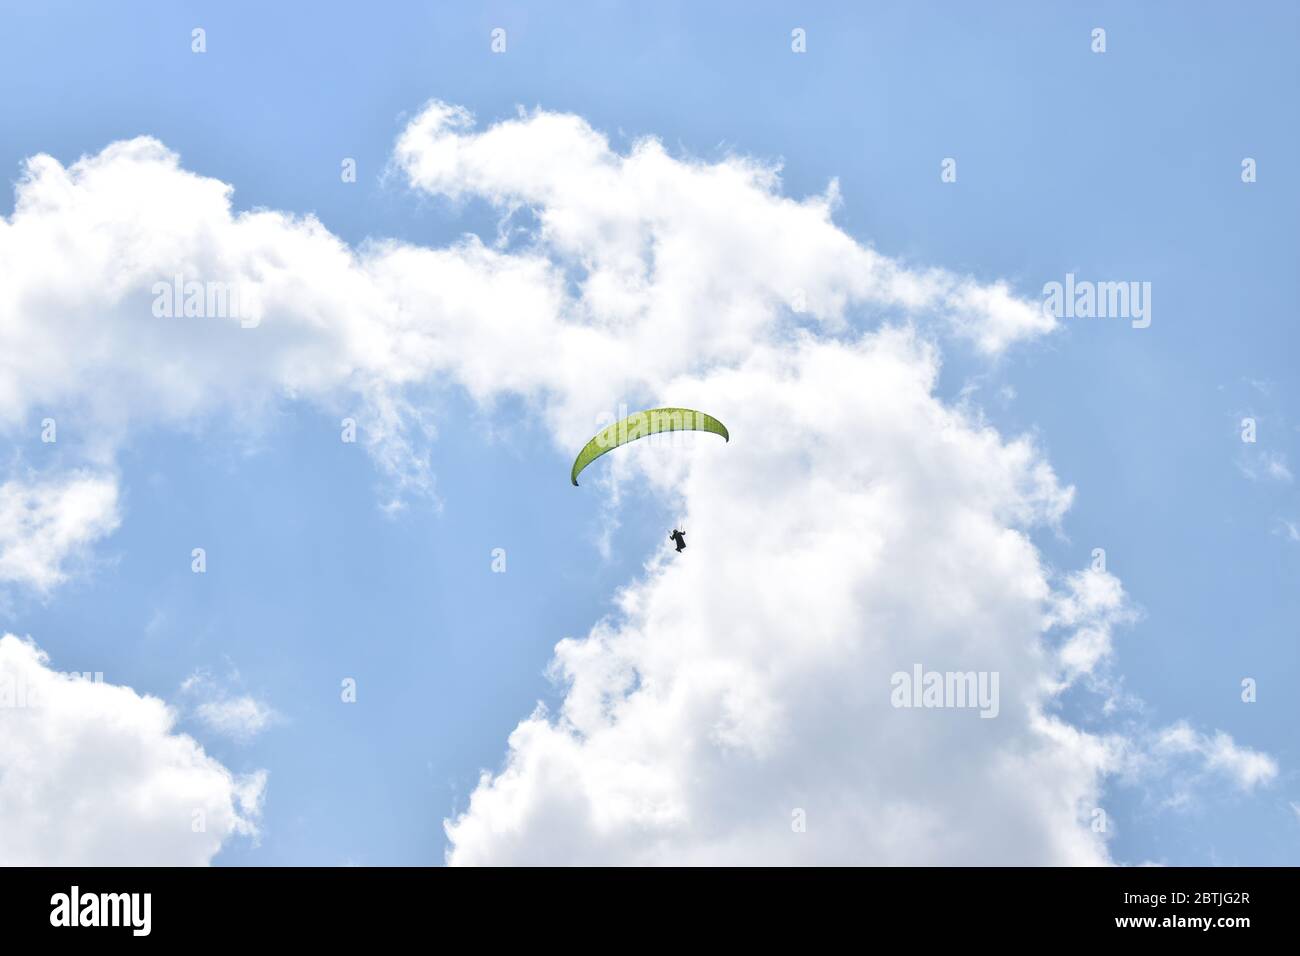 Yellow parachute in the blue sky Stock Photo